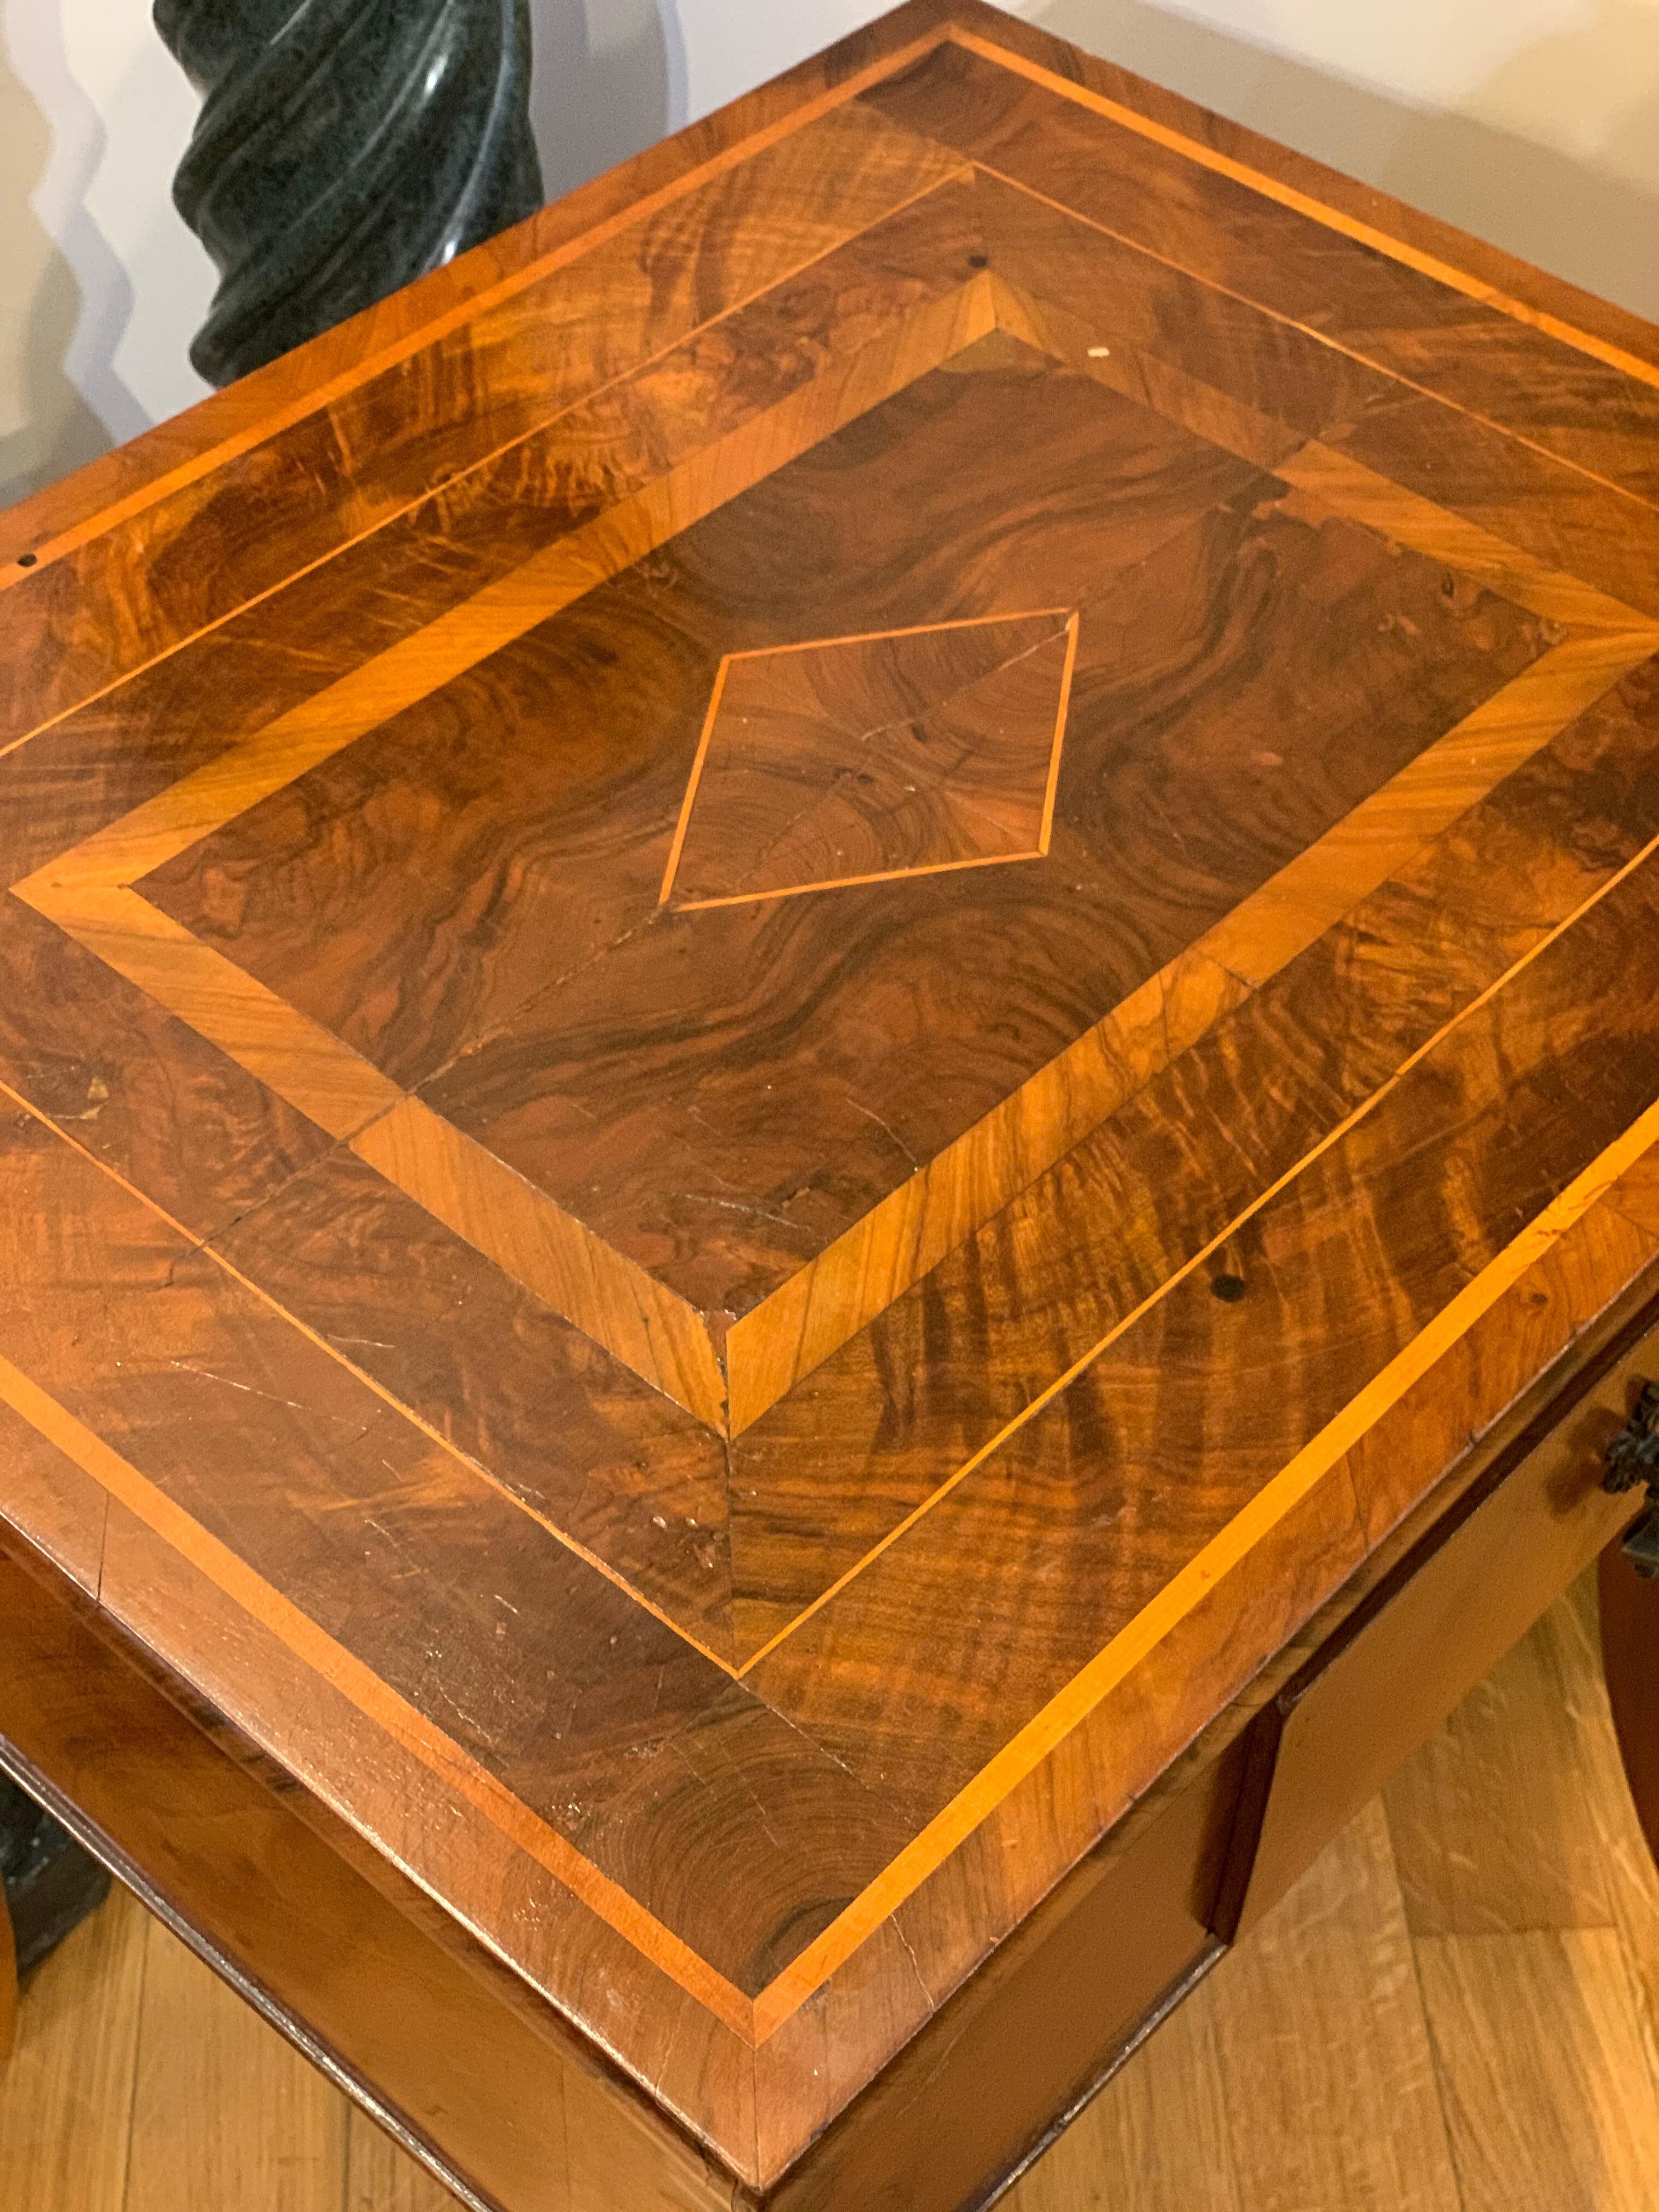 Elegant Directoire small table inlaid with various fruit essences with geometric motifs. Typical saber leg used in the transition period between Louis XVI and the Empire, especially in Tuscany. The table has a very comfortable central drawer and is